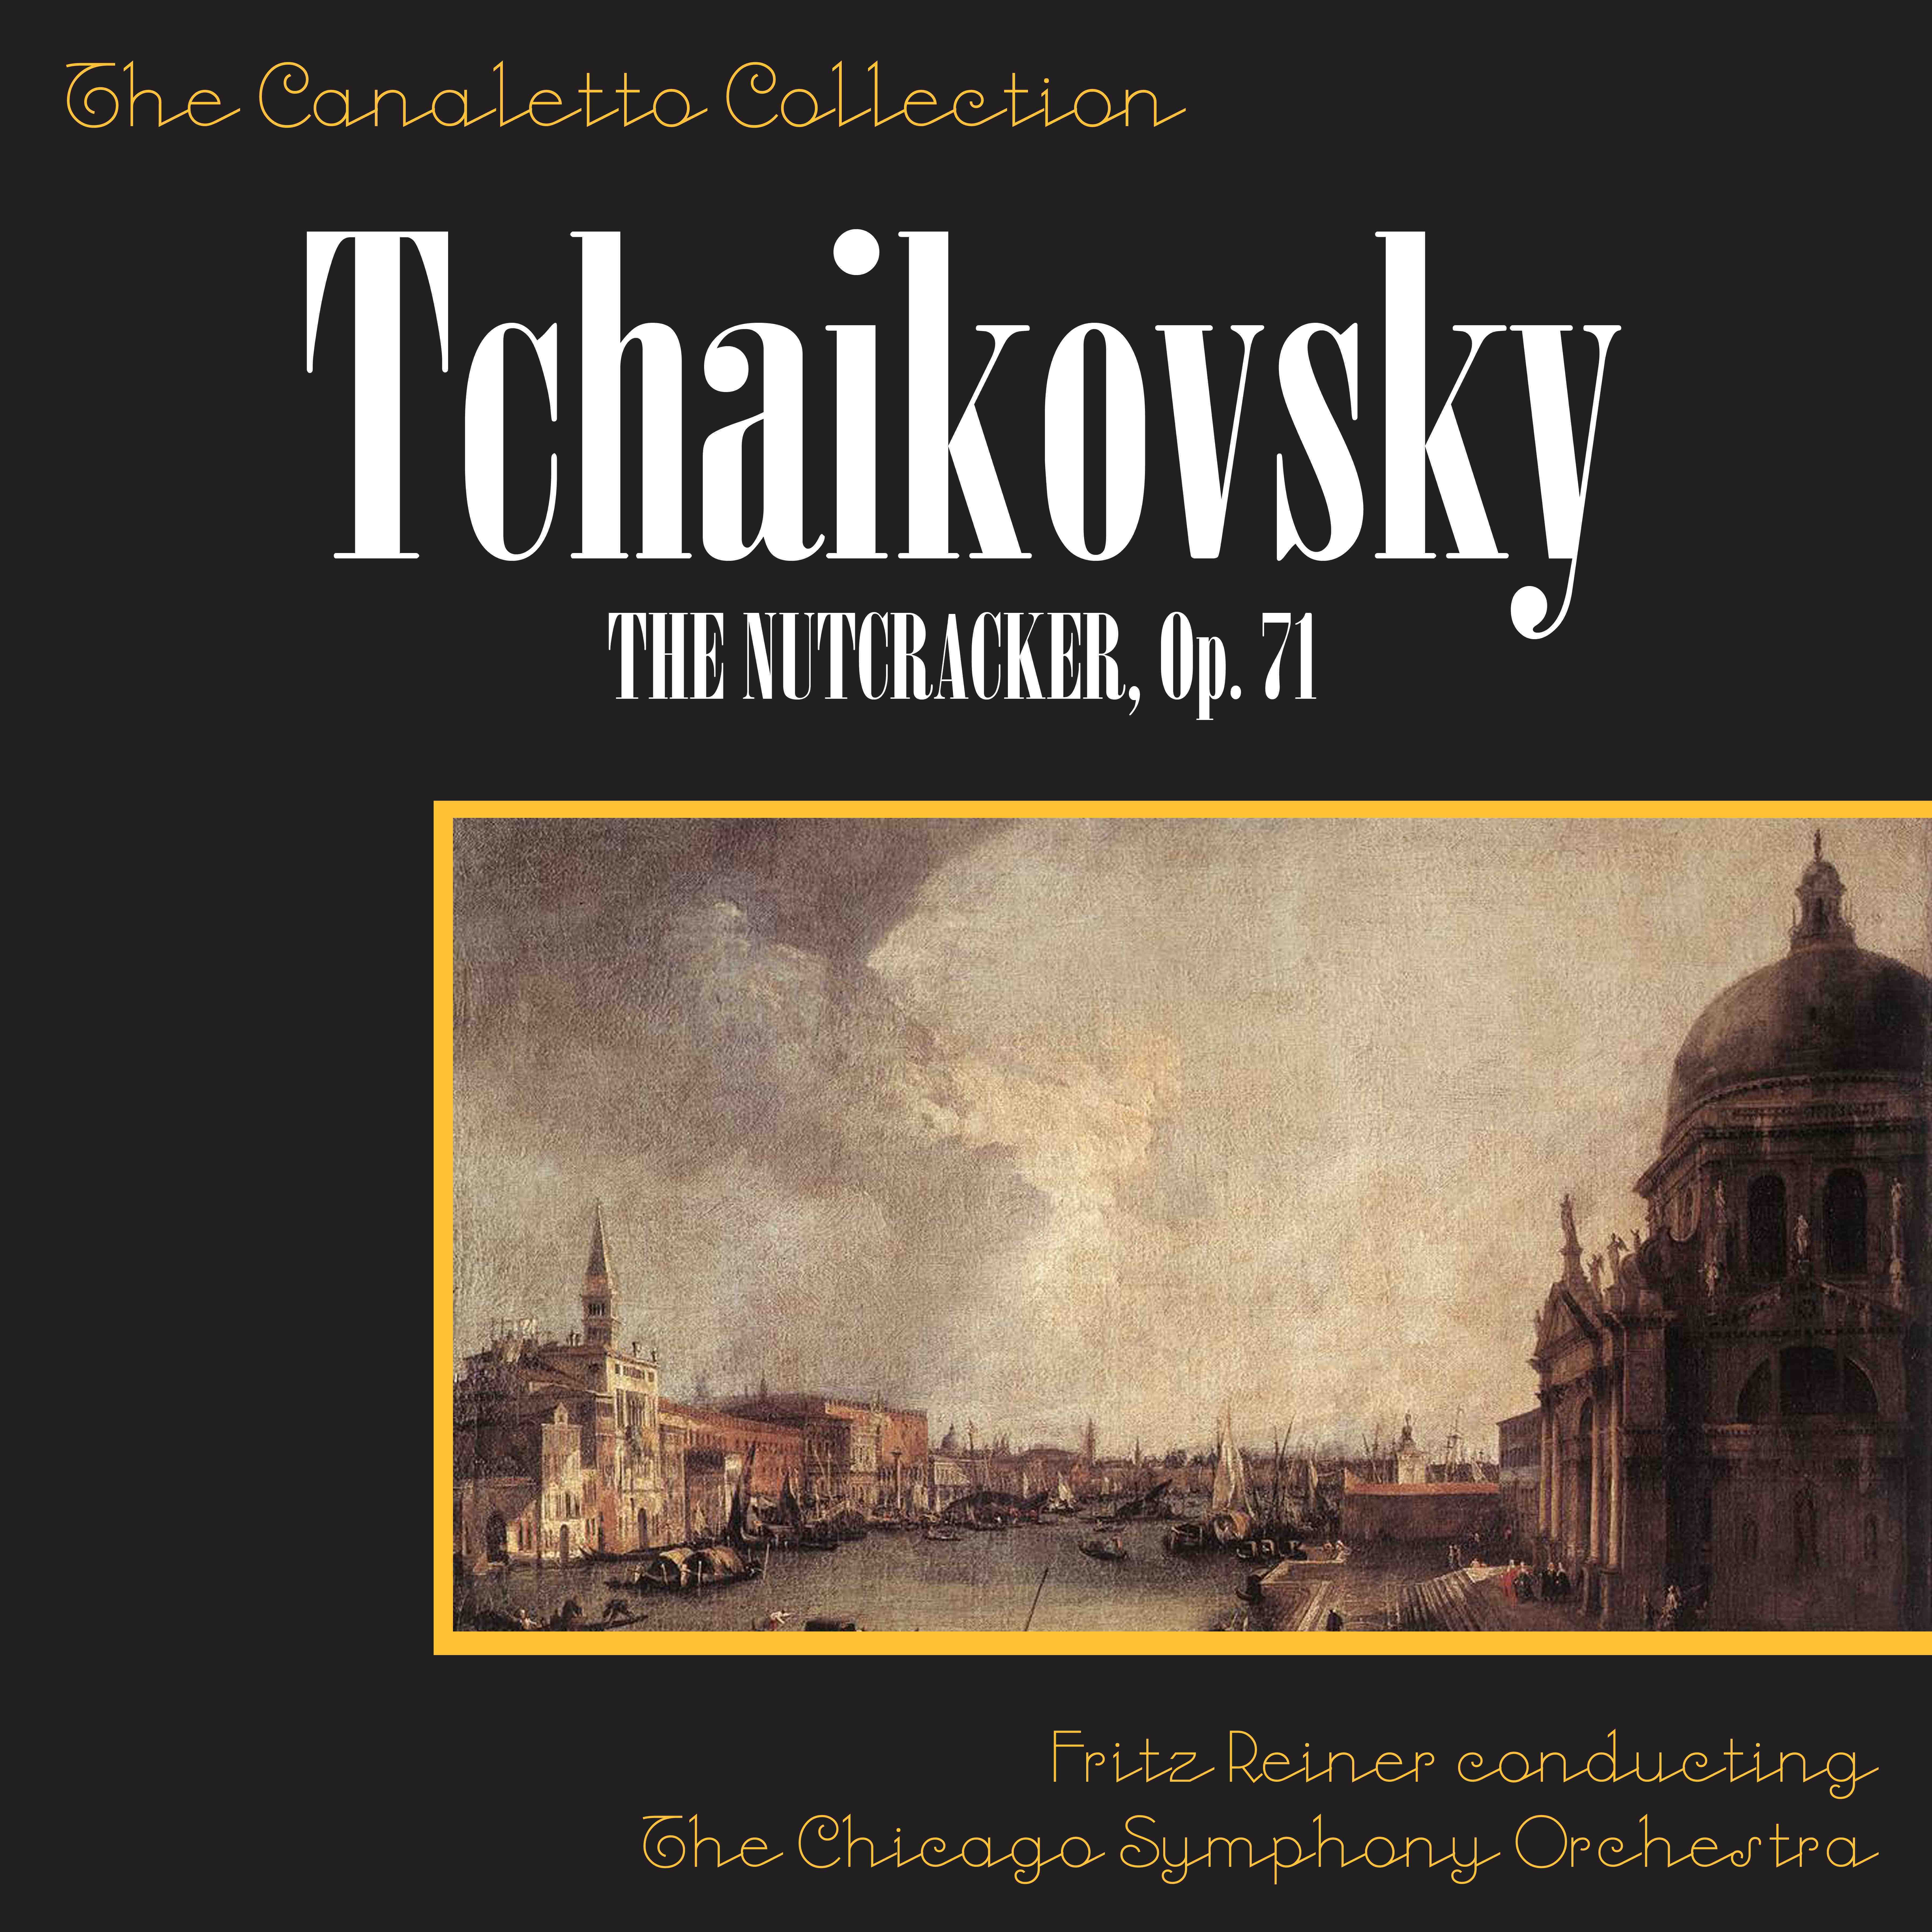 Tchaikovsky: Excerpts From The Nutcracker, Op. 71